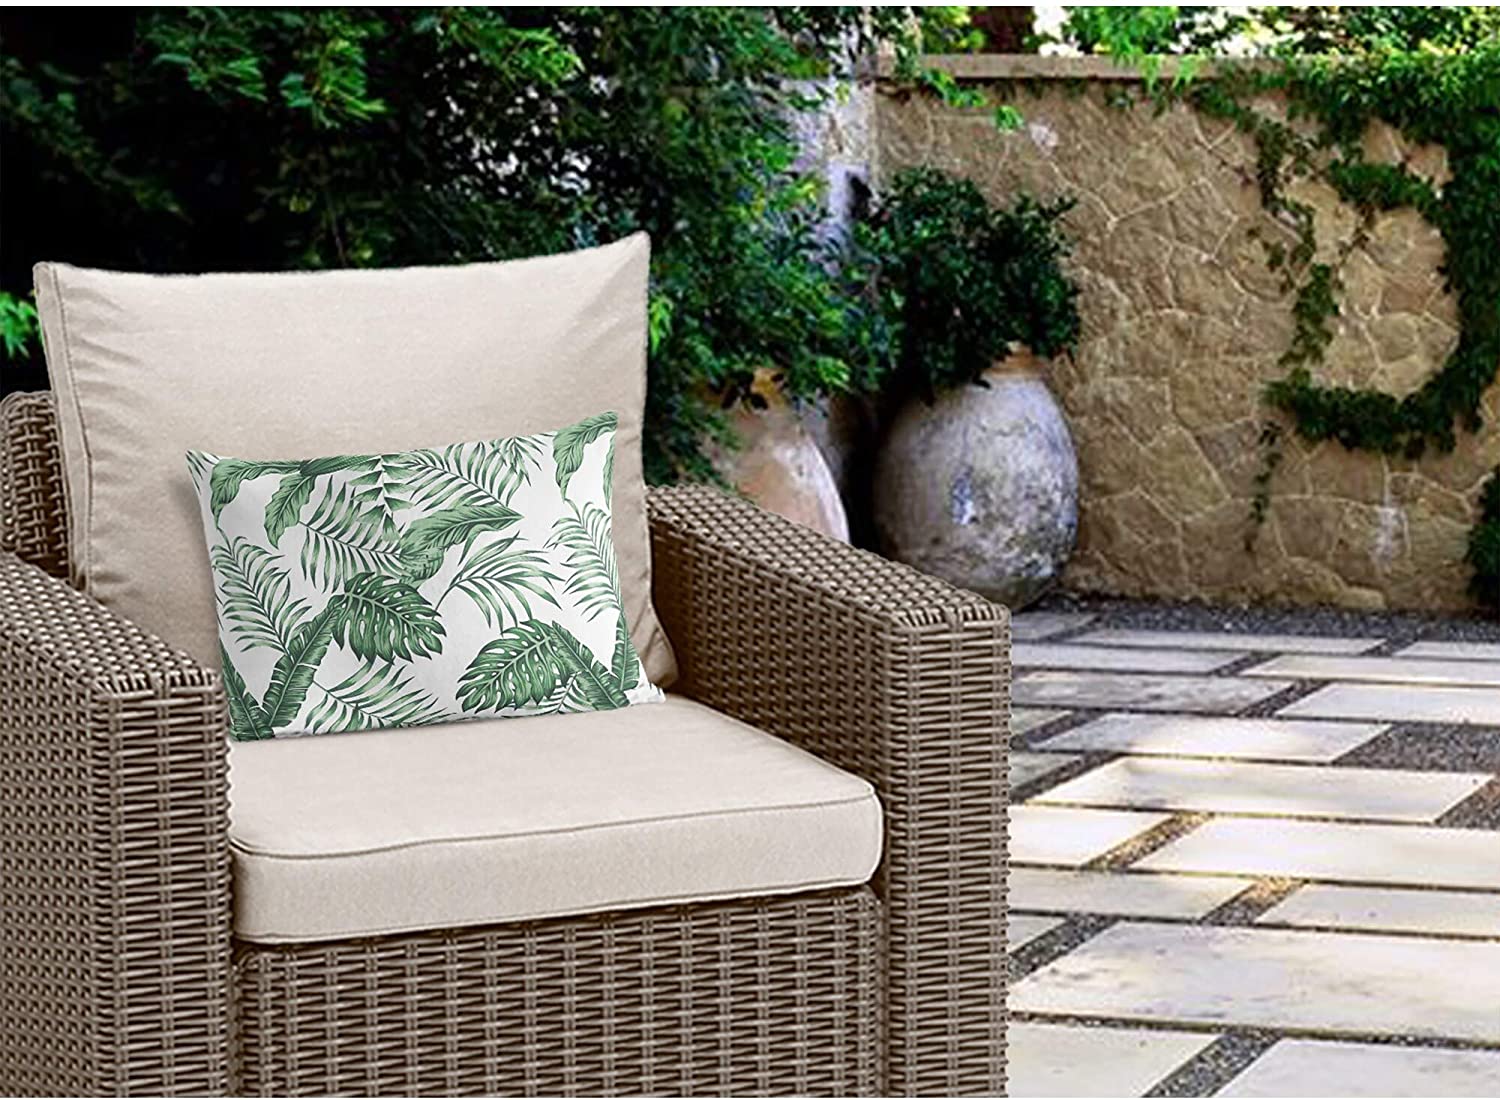 MISC Green Tropical Leaves Indoor|Outdoor Lumbar Pillow 20x14 Green Floral Tropical Polyester Removable Cover